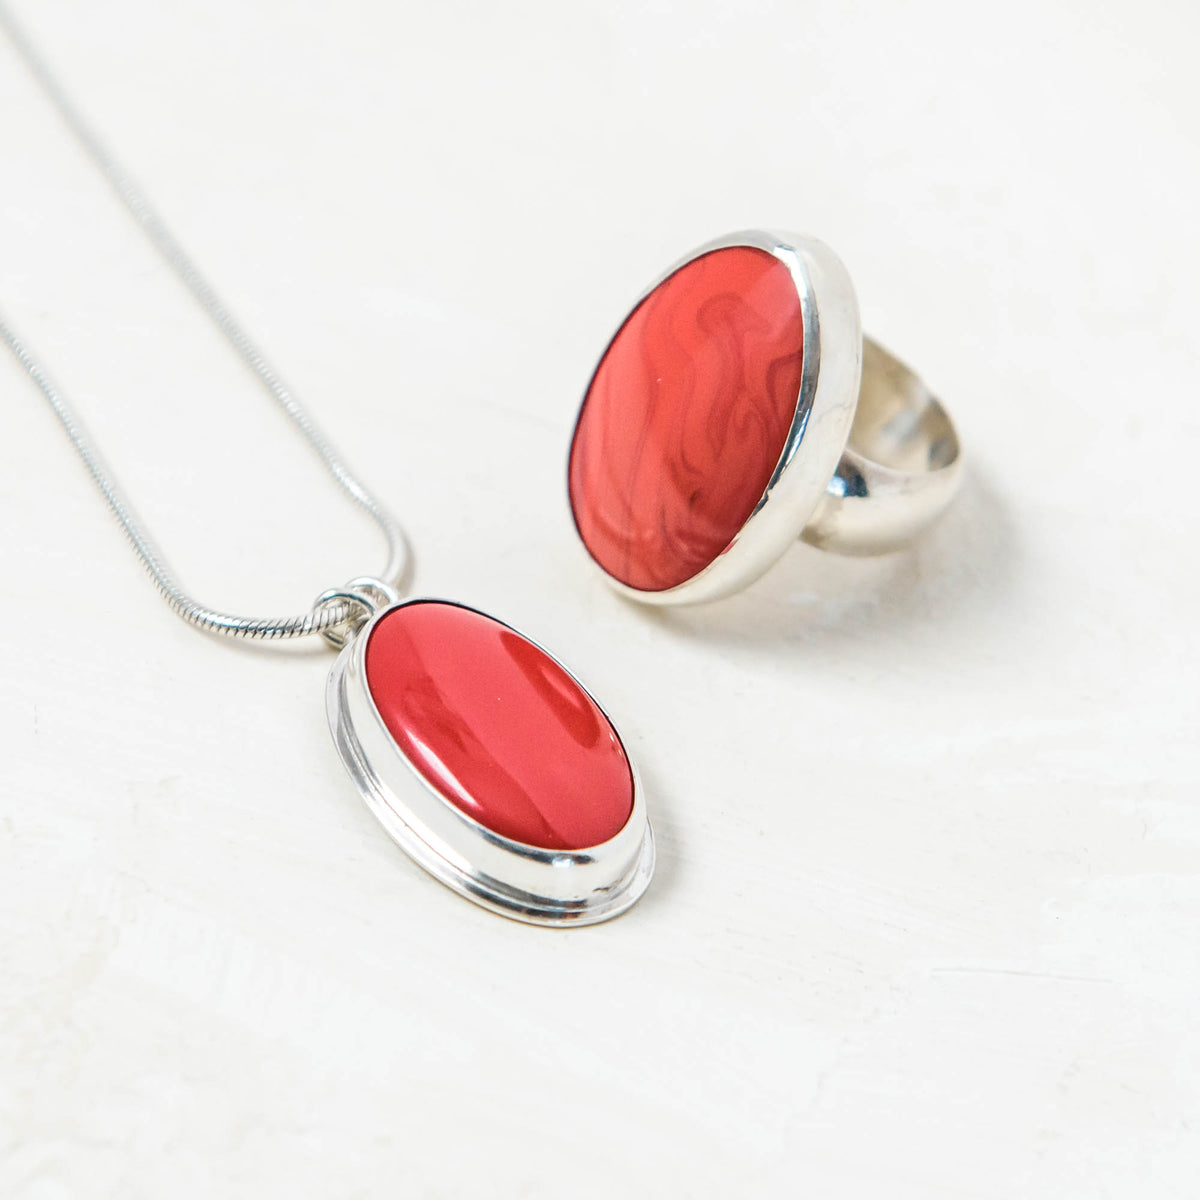 Red Rosarita oval and silver pendant and rosarita and silver ring large. Handmade by laura de zordo jewellery